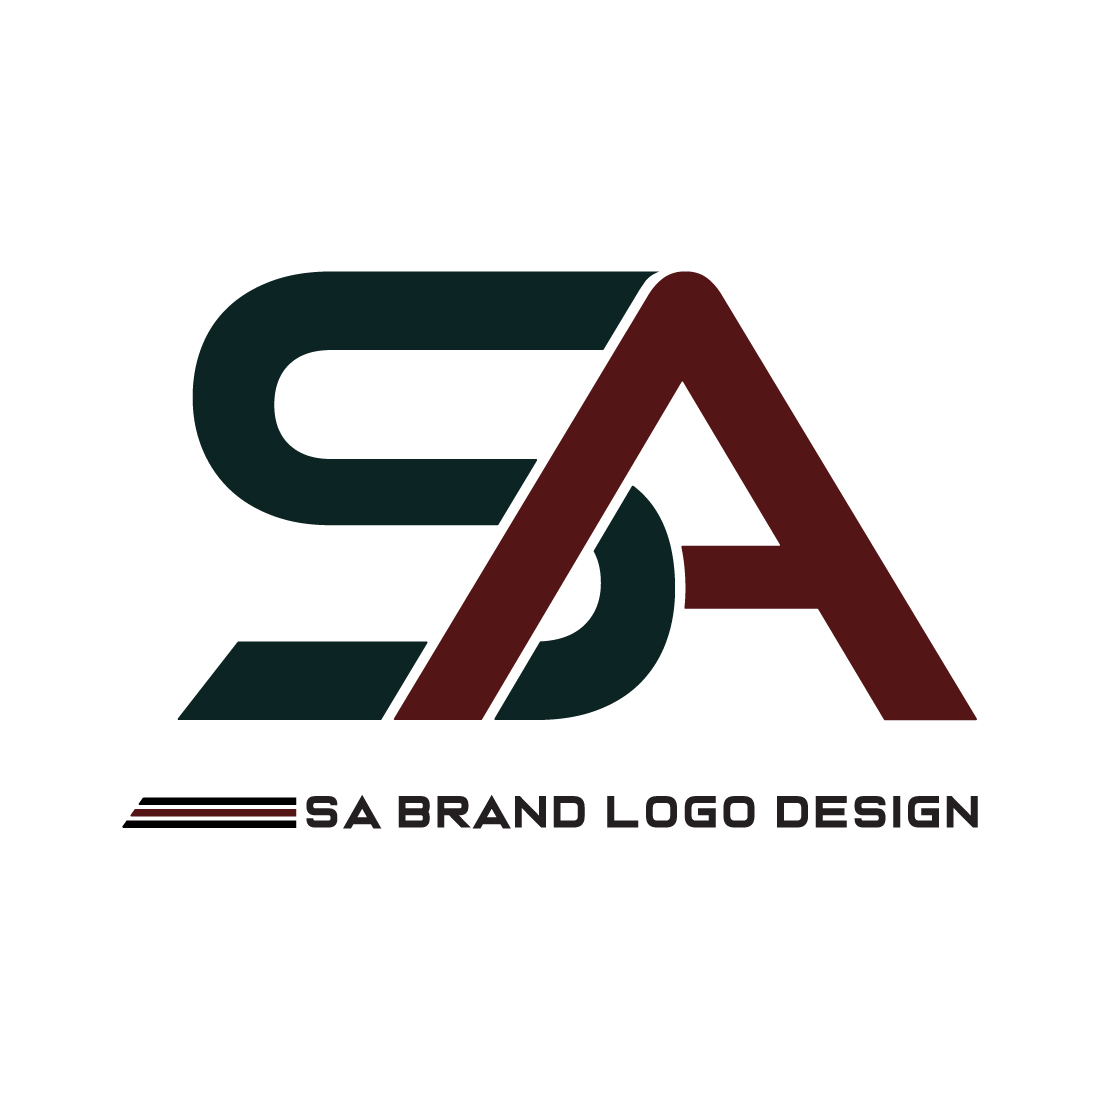 Initials SA letters logo design vector icon AS letters logo monogram best royalty SA logo design best icon SA logo design preview image.